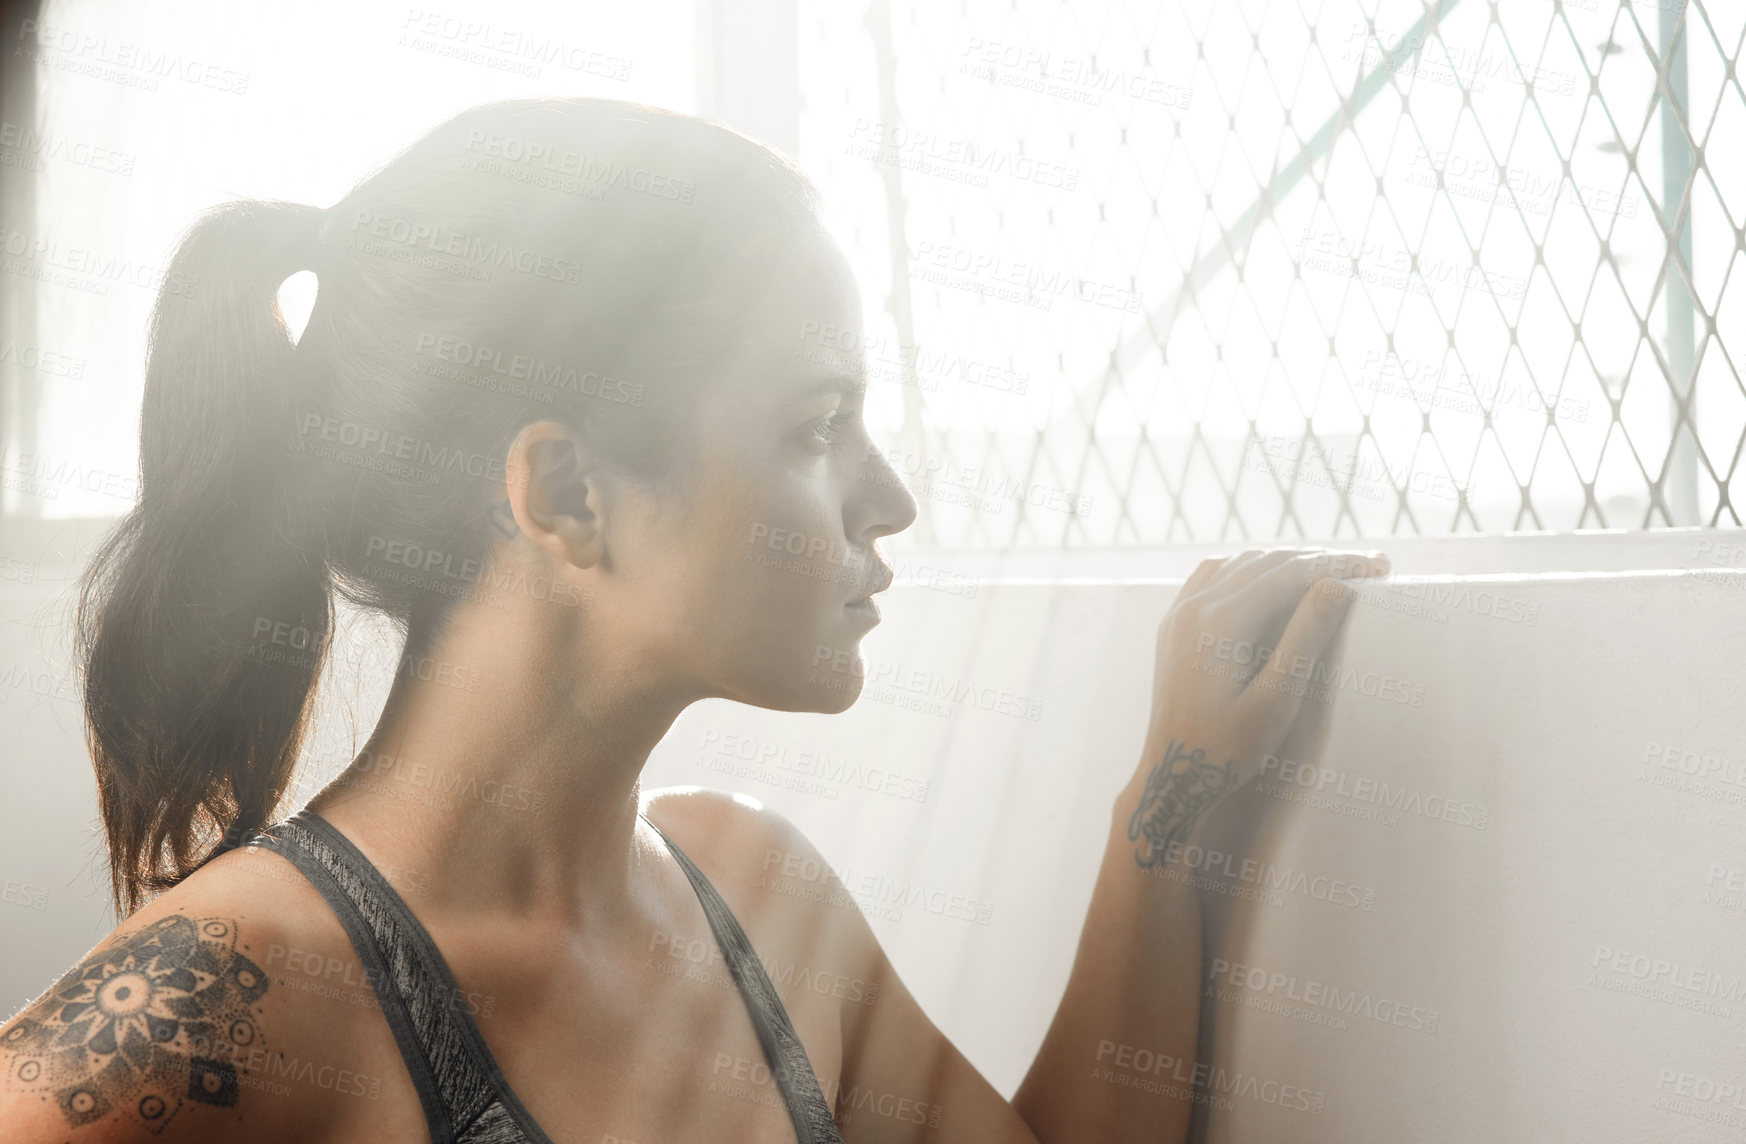 Buy stock photo Cropped shot of a young female athlete looking thoughtful at the gym